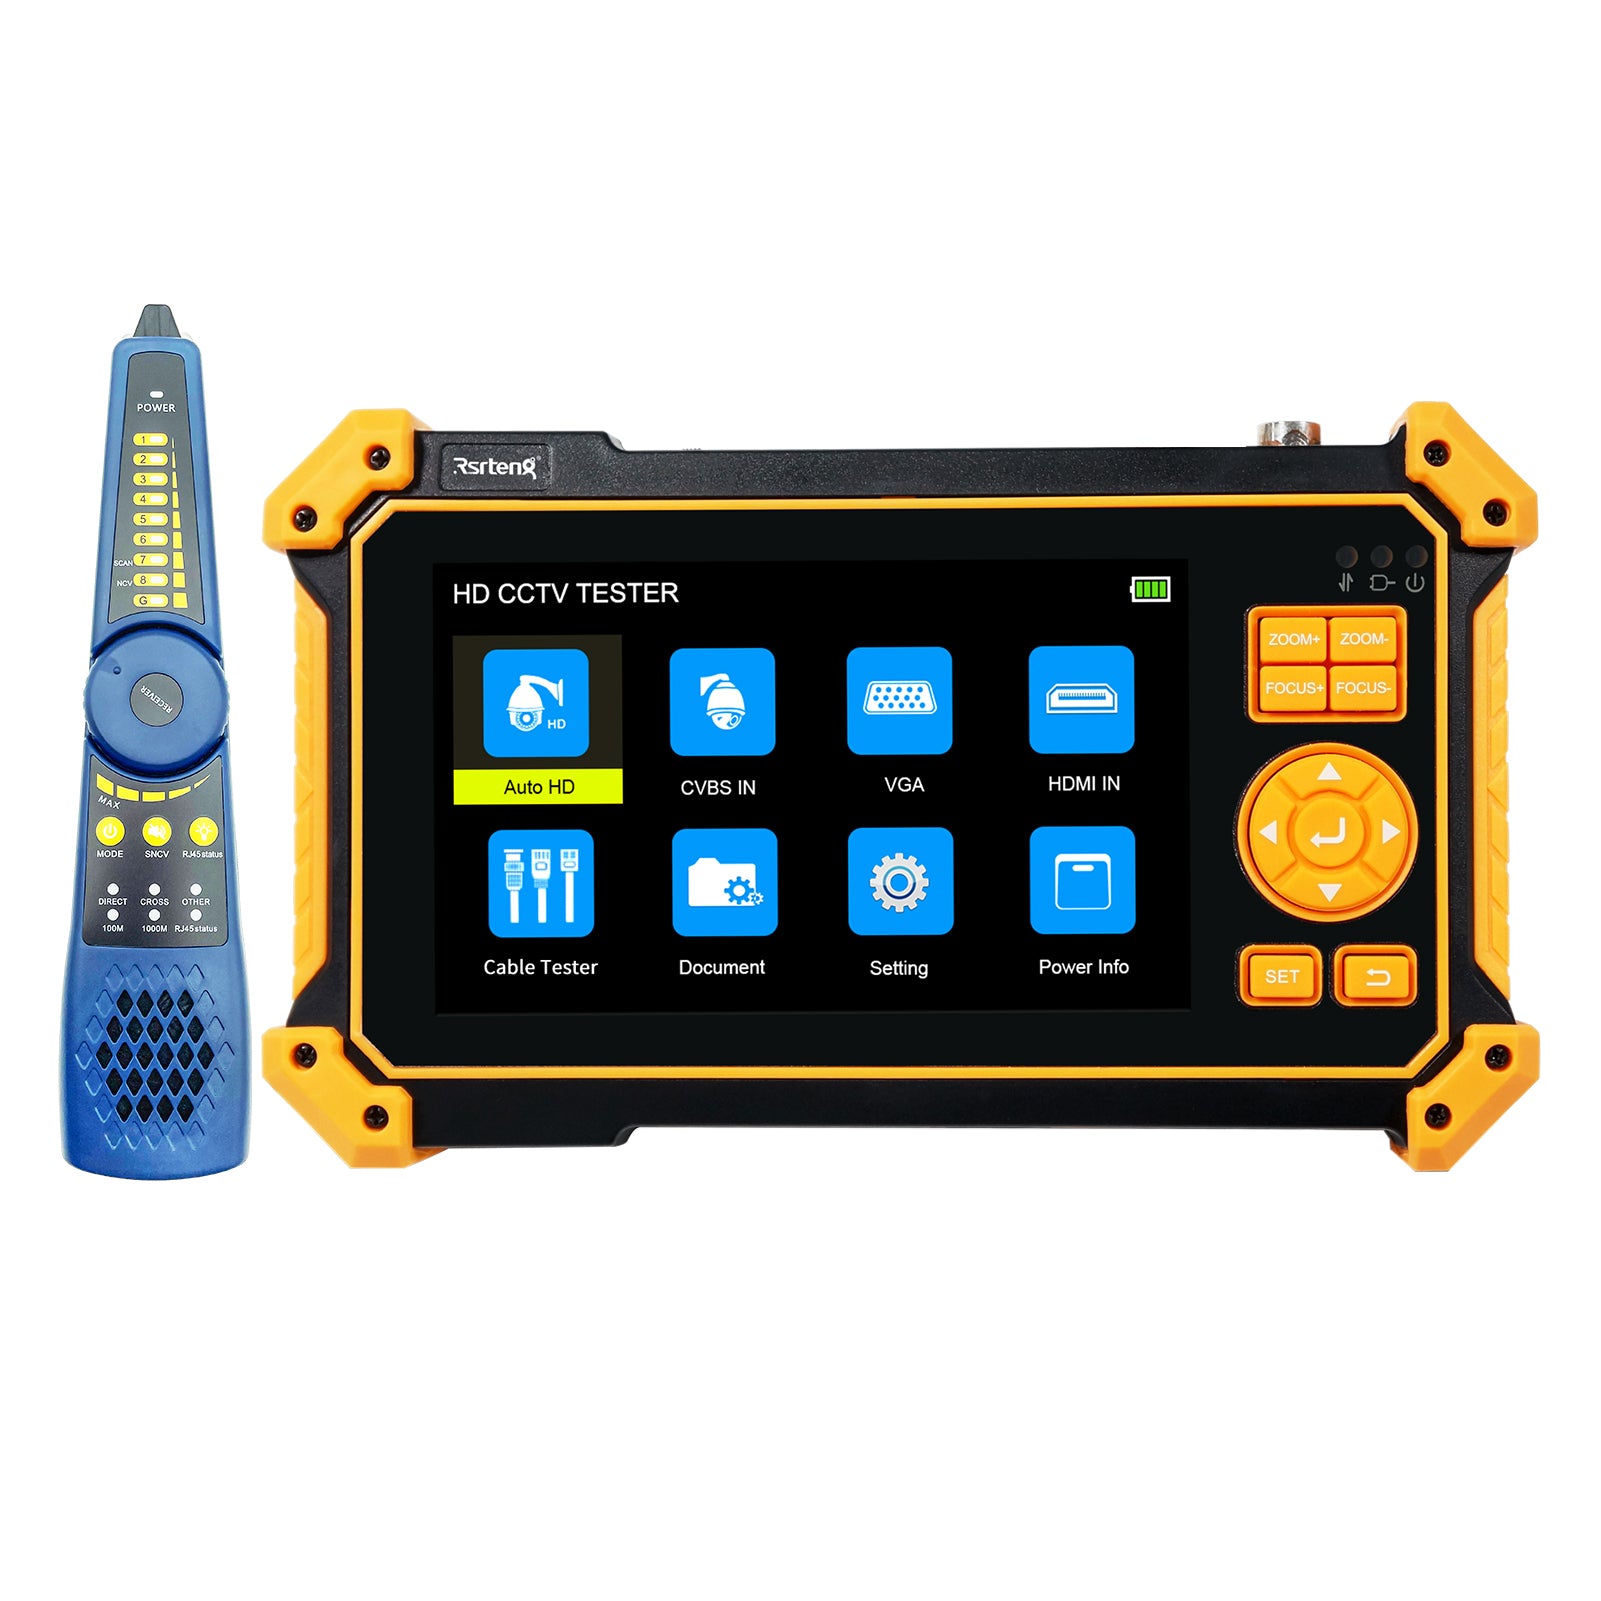 HD-3100C Plus Coaxial Security Camera Tester